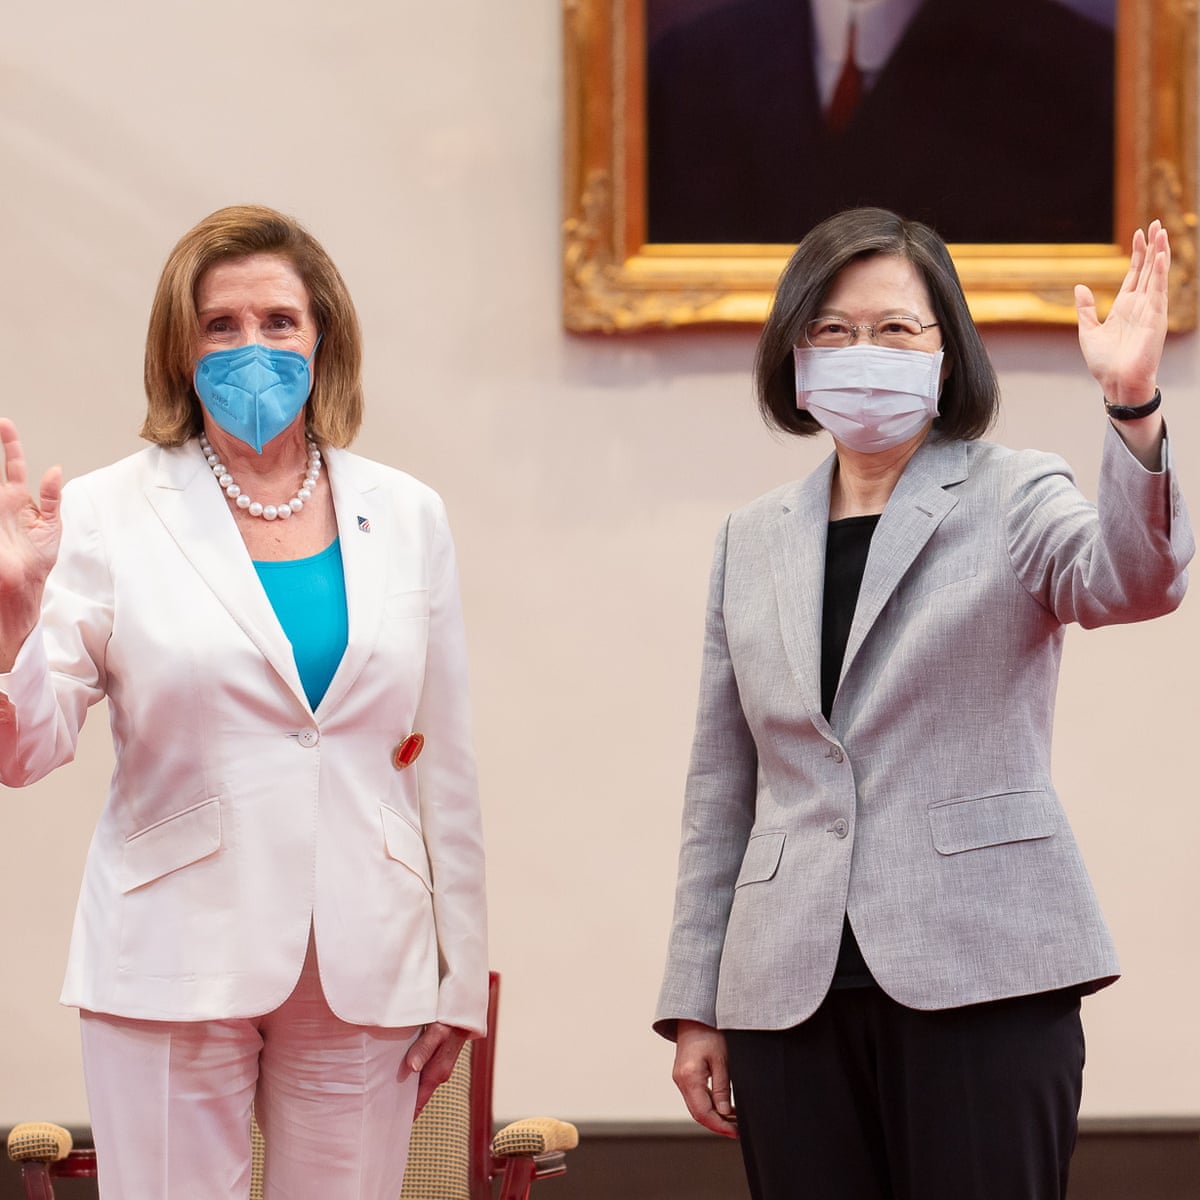 Nancy Pelosi Pledges ‘Crucial’ U.S. Solidarity with Taiwan as China Vows ‘Consequences’ for Visit and Begins Live Fire Drills